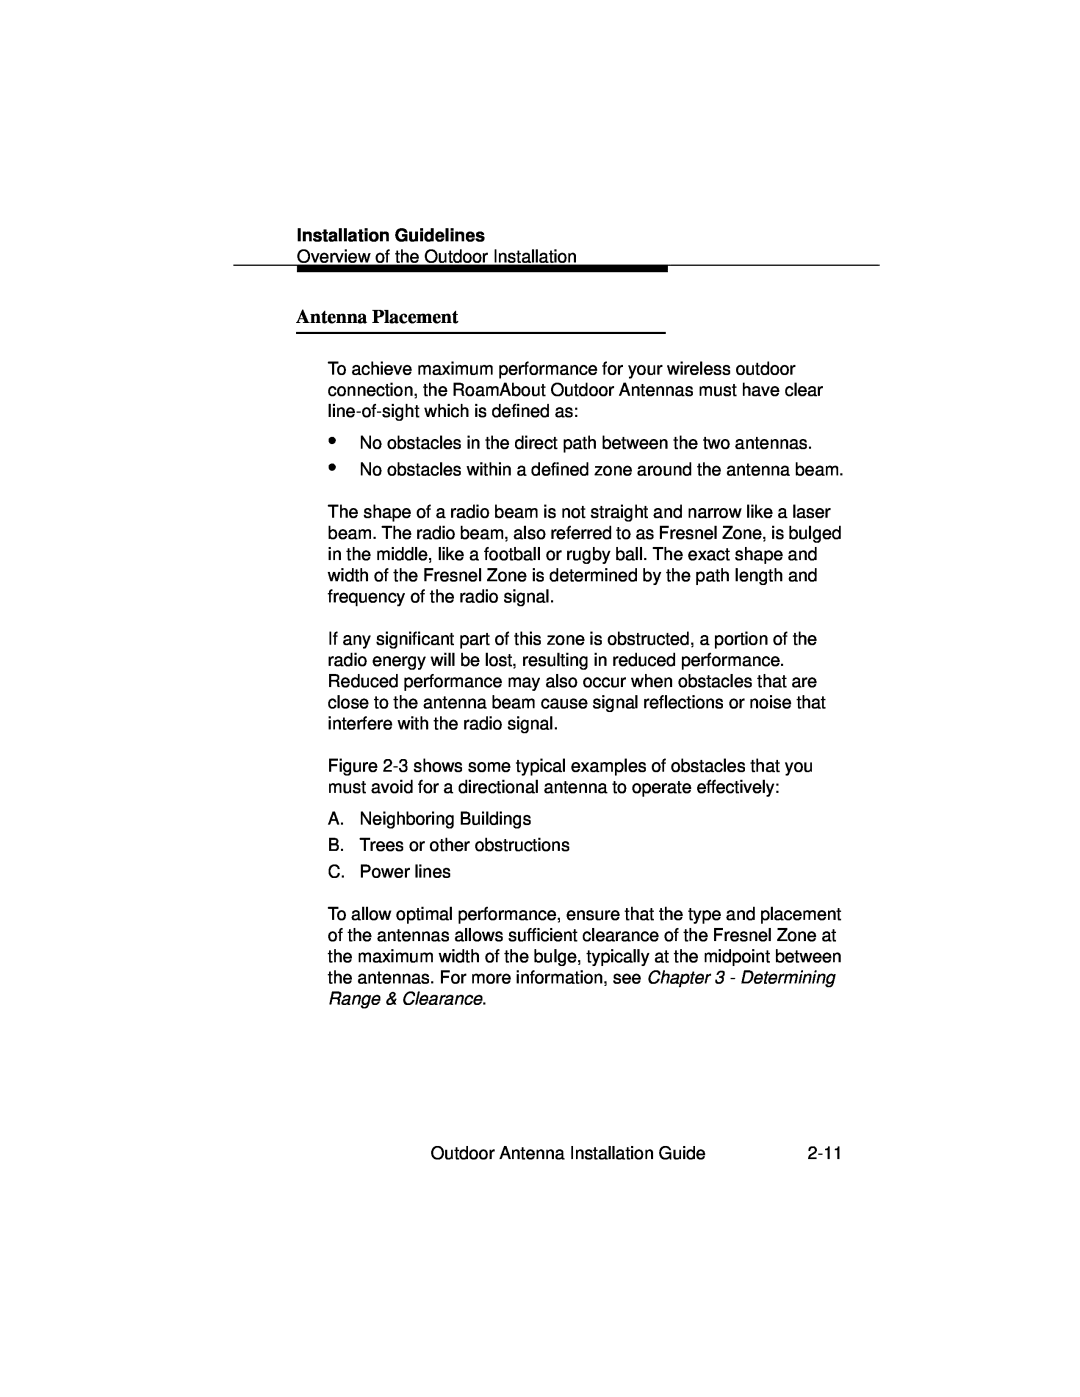 Cabletron Systems 9033073 manual Antenna Placement, Installation Guidelines 